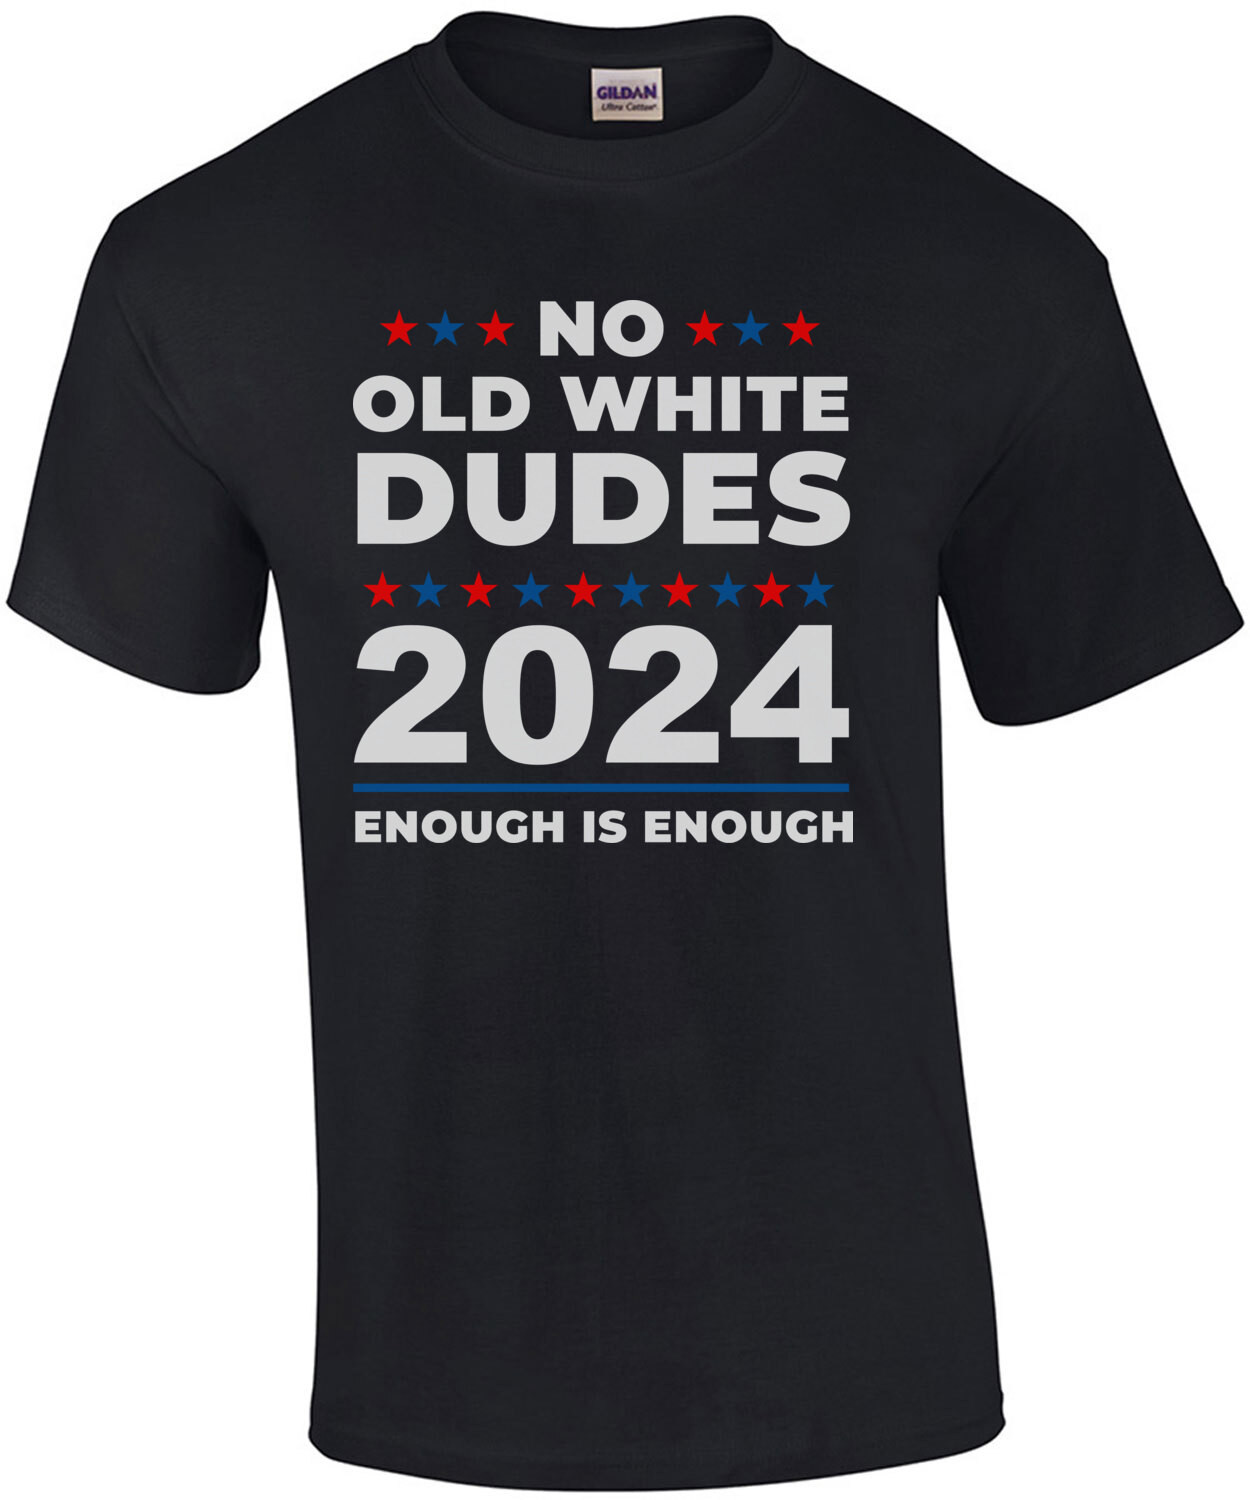 No Old White Dudes 2024 - Election Shirt